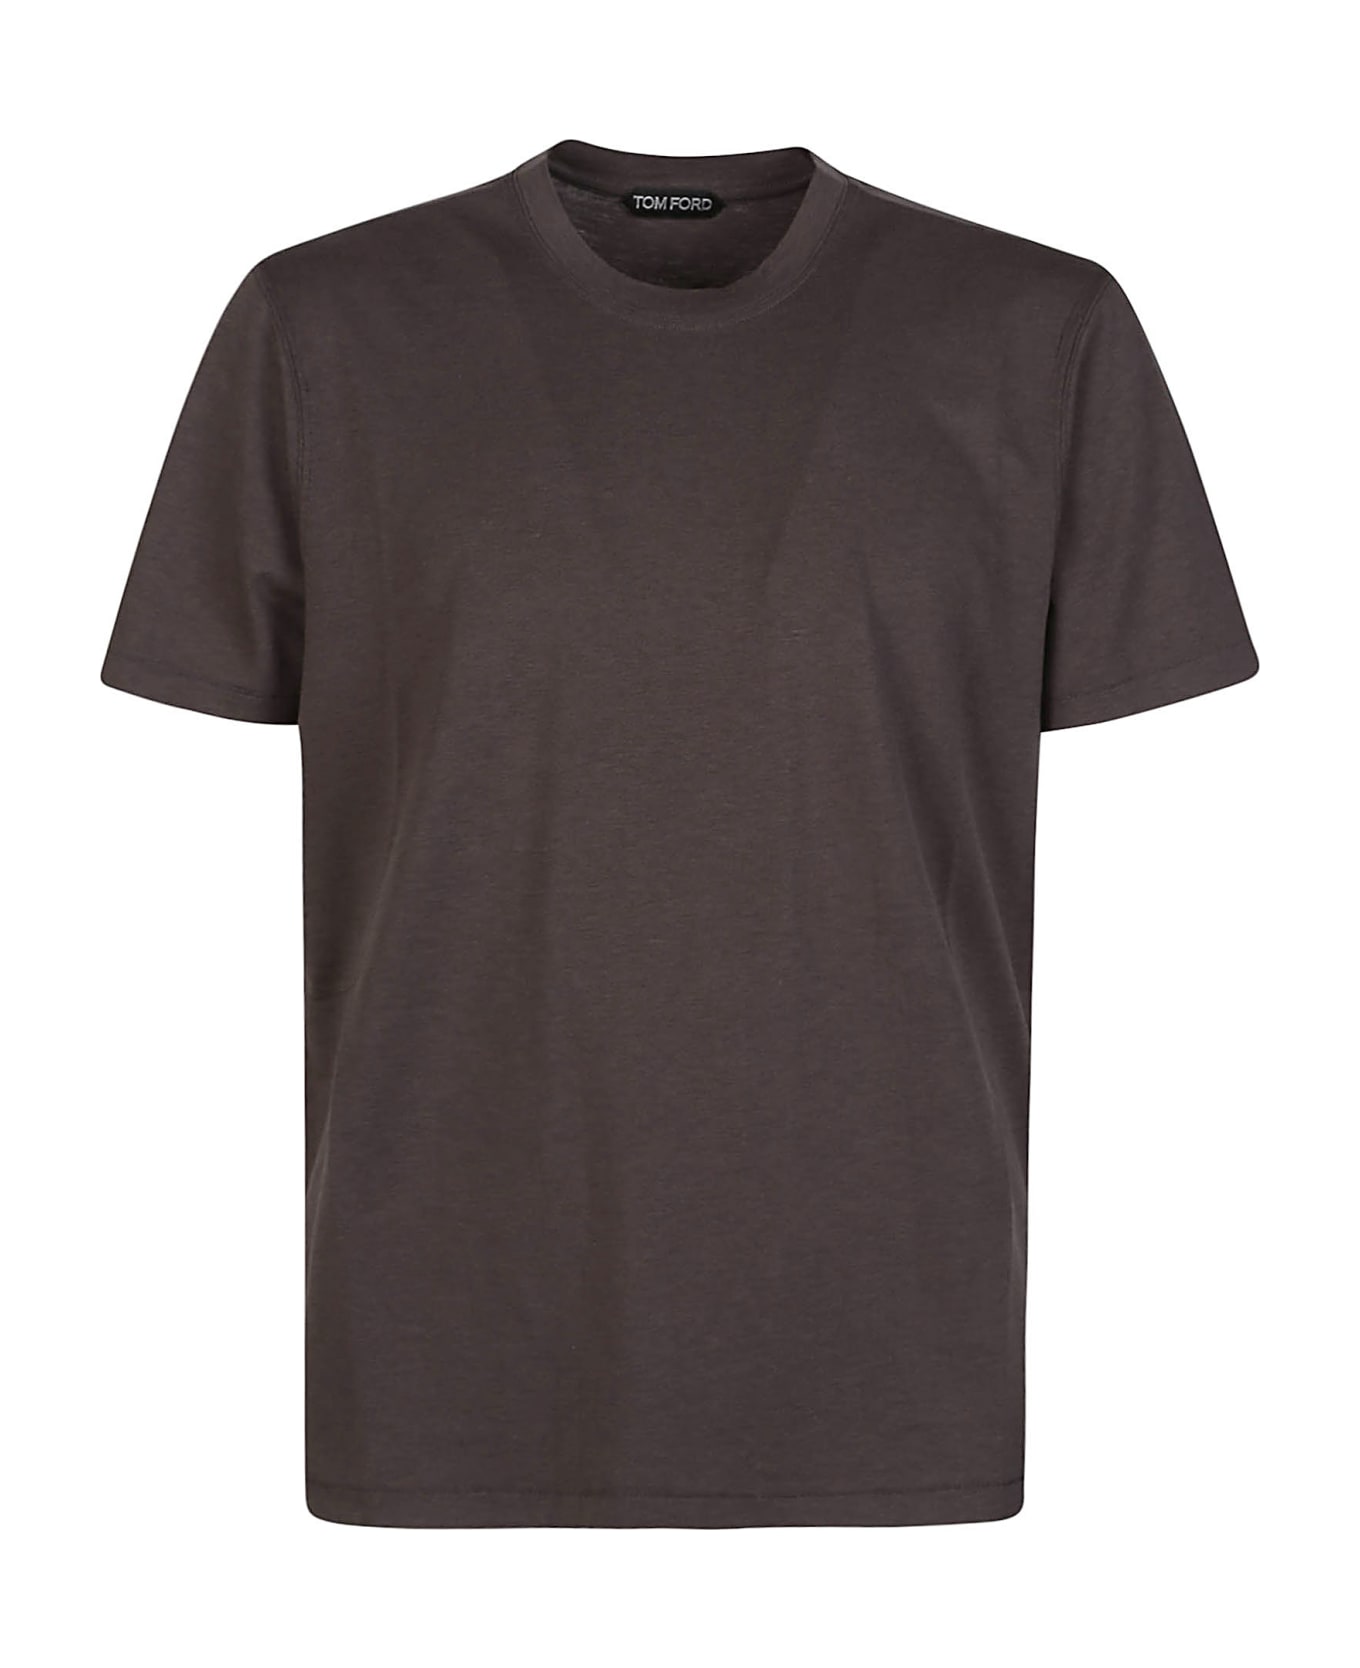 Tom Ford T-shirt - Anthracite